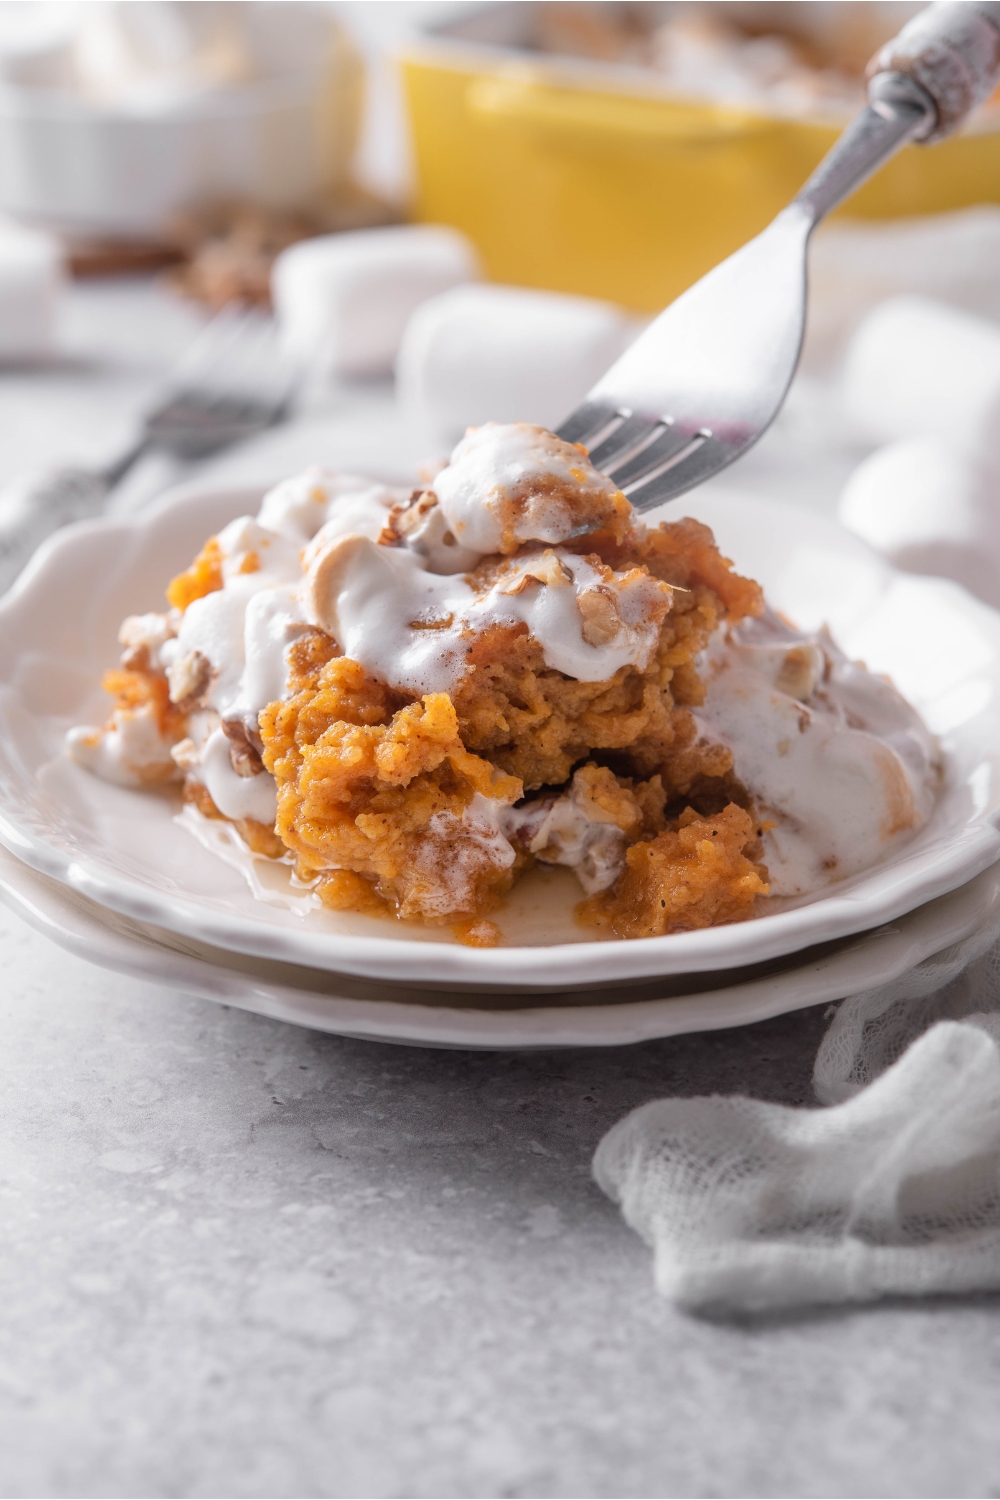 A serving of sweet potato casserole with marshmallows melting over top of the casserole. A fork is holding a piece of casserole over top of the plate.